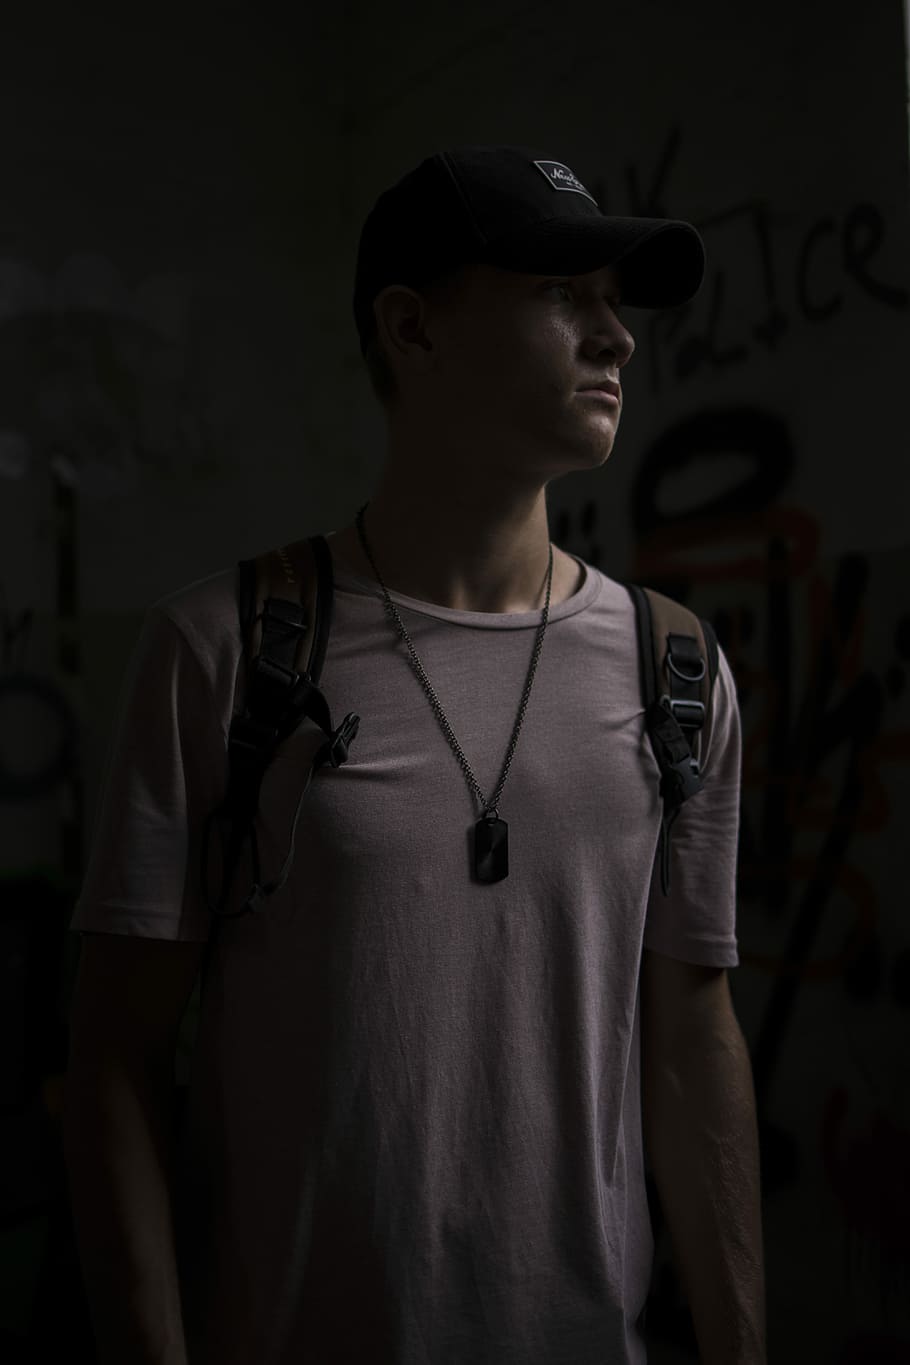 man wearing white T-shirt and backpack standing in a dark lit room, man wearing backpack and cap inside dimmed room